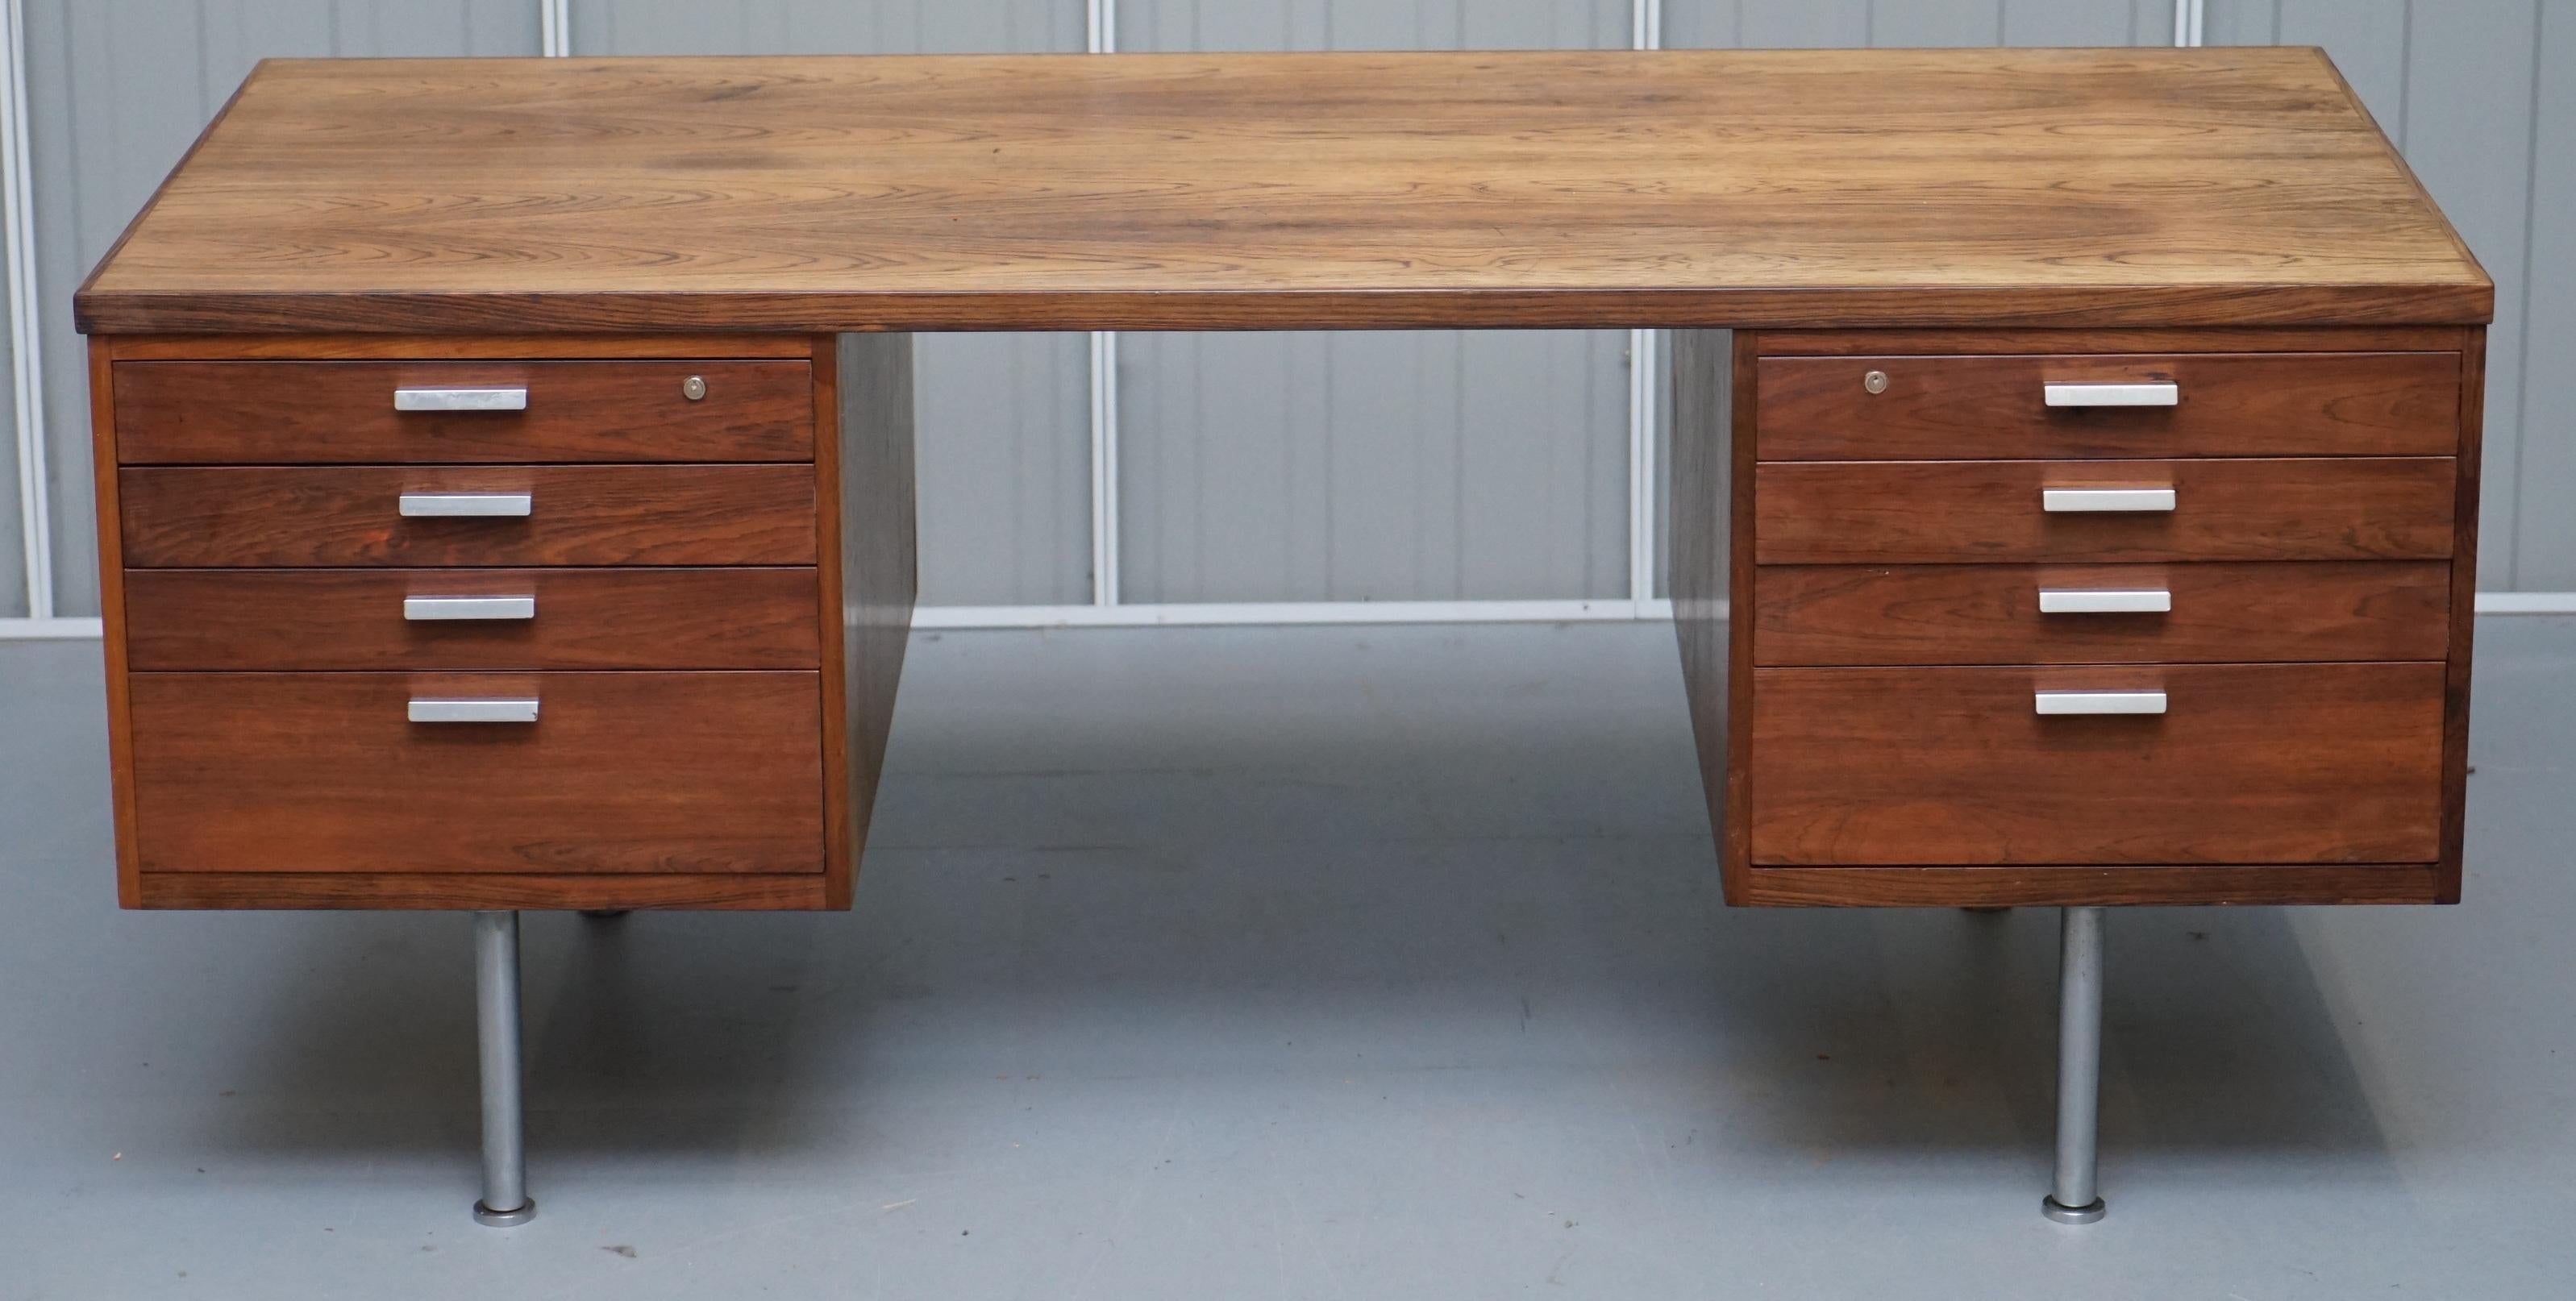 We are delighted to offer for sale this stunning 1960s Danish desk with bookshelf back after the design by Kai Kristiansen for Skovmand & Andersen in Brazilian hardwood

Danish designer Kai Kristiansen was born in 1929. Like many of Denmark's